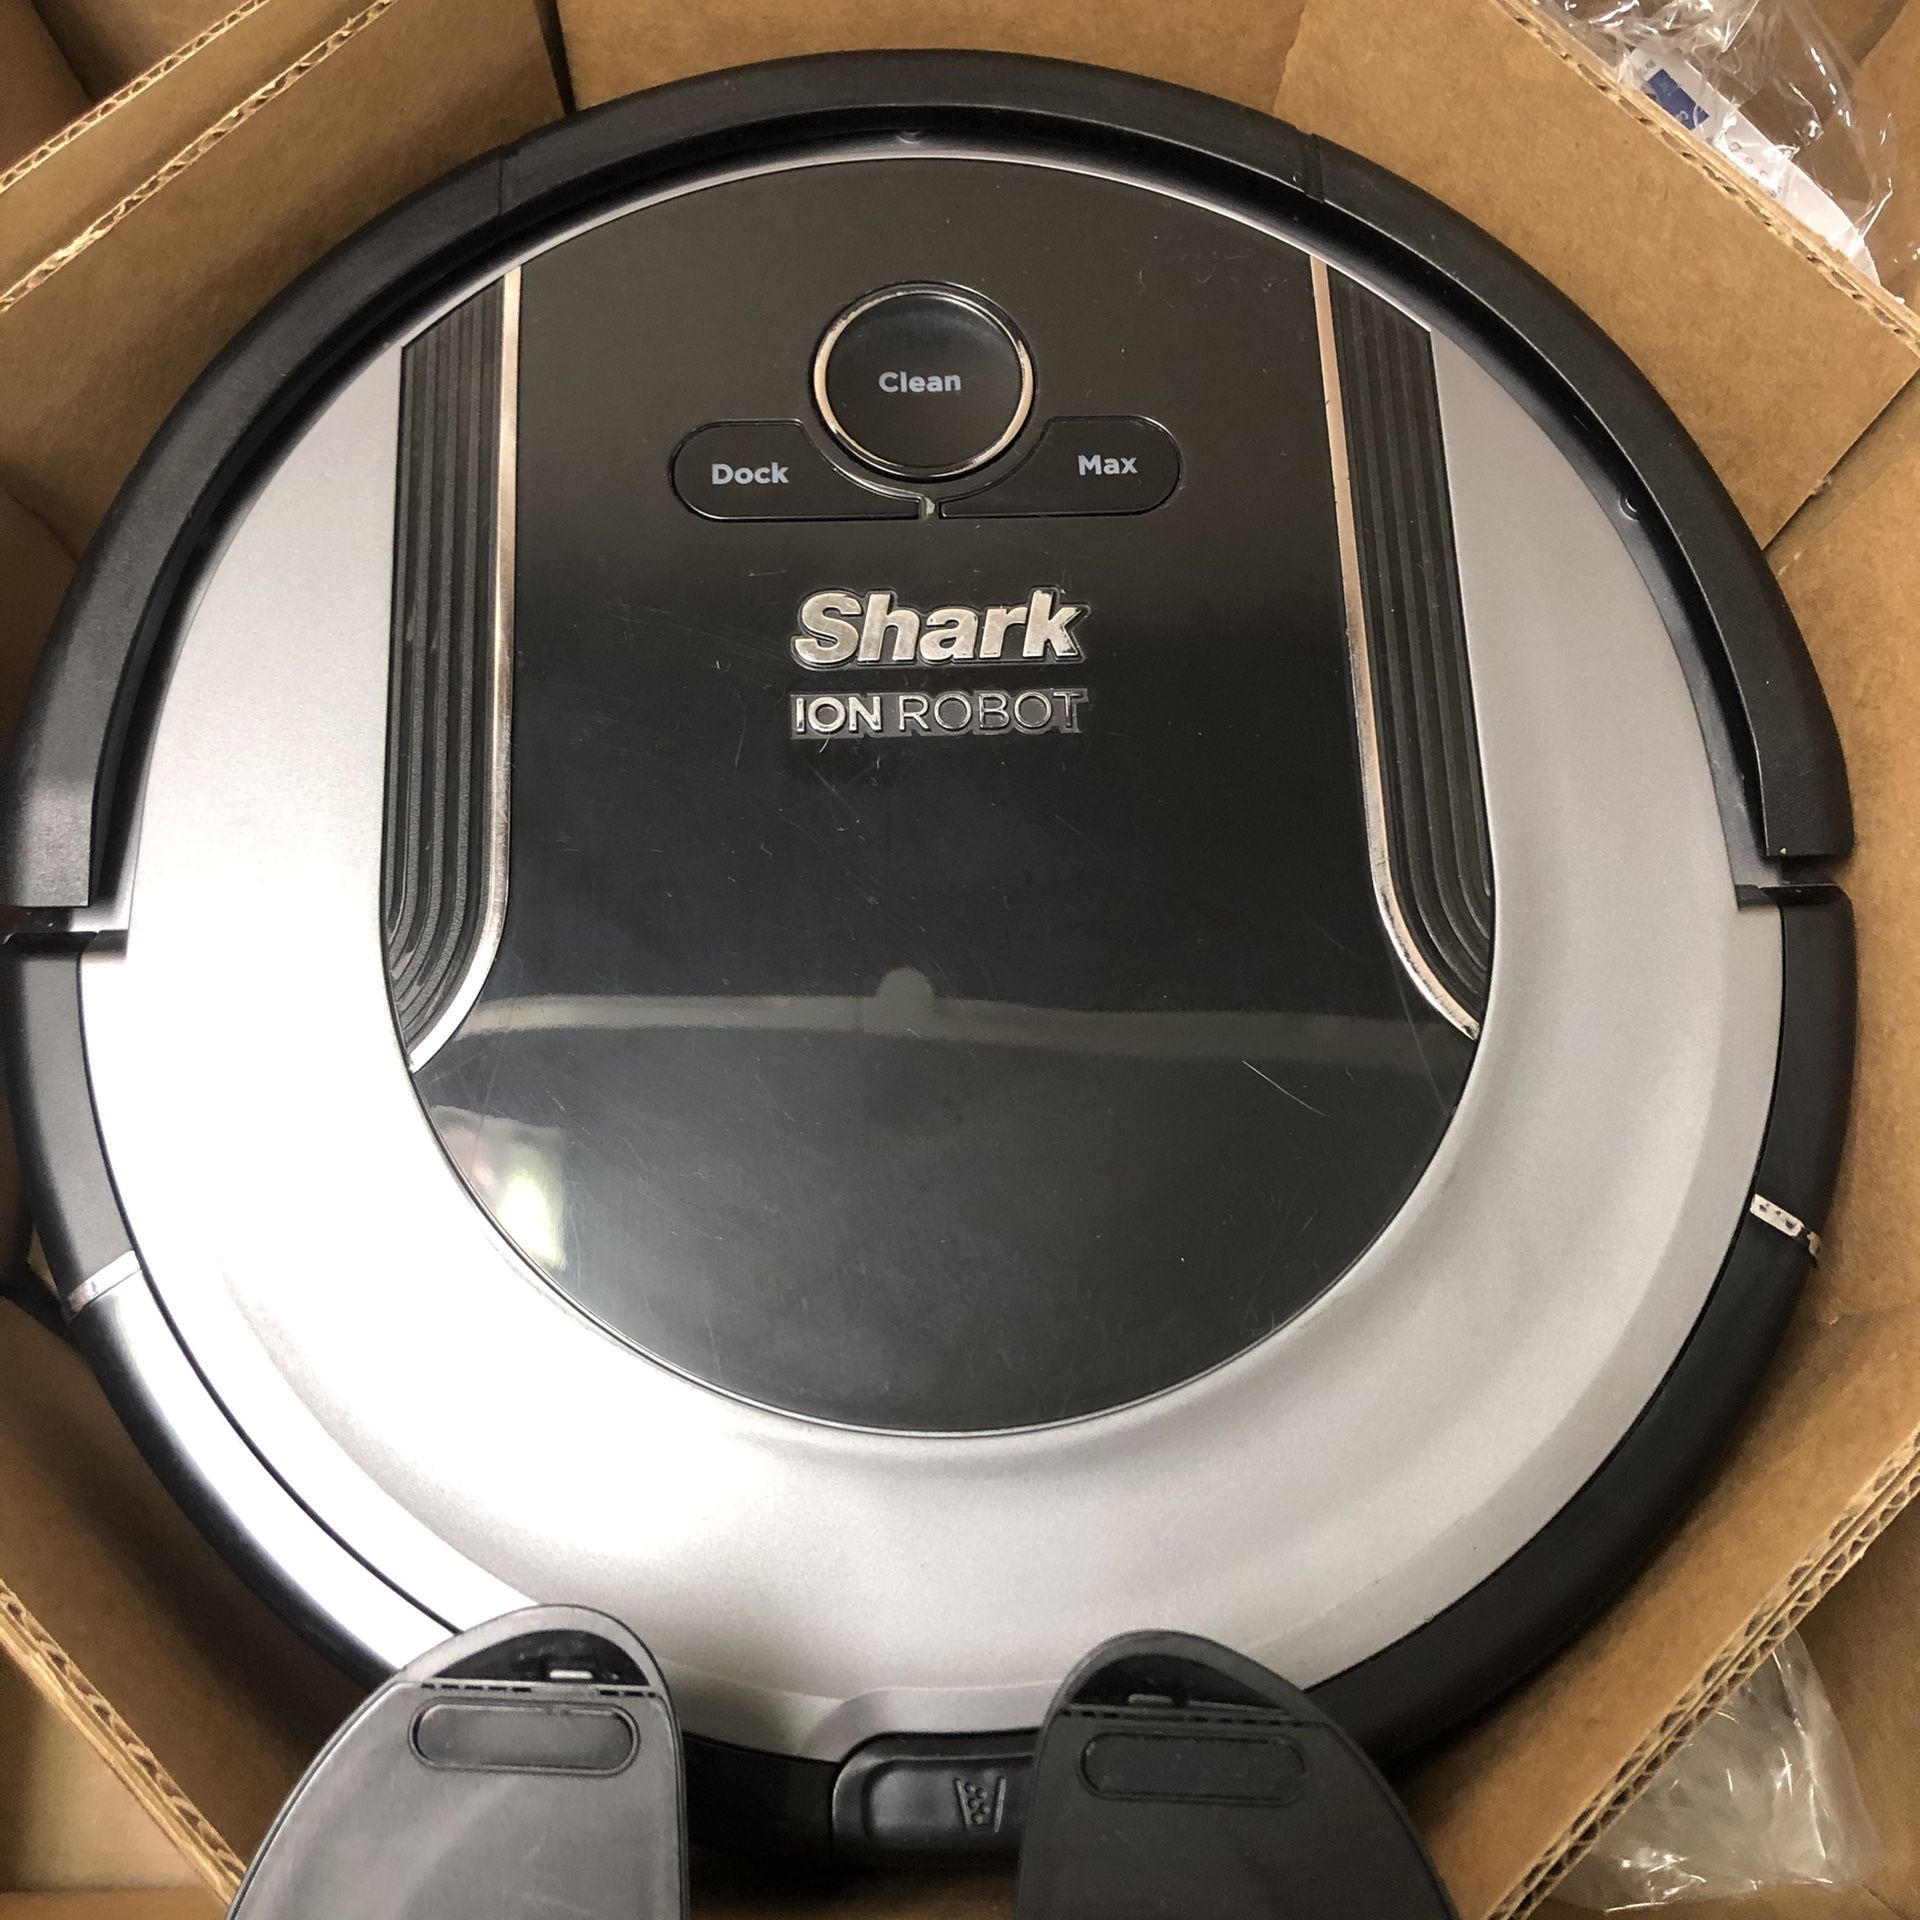 SHARK ION Robot Vacuum R85 WiFi-Connected with Powerful Suction, XL Dust Bin, Self-Cleaning Brushroll and Voice Control with Alexa or Google Assistan